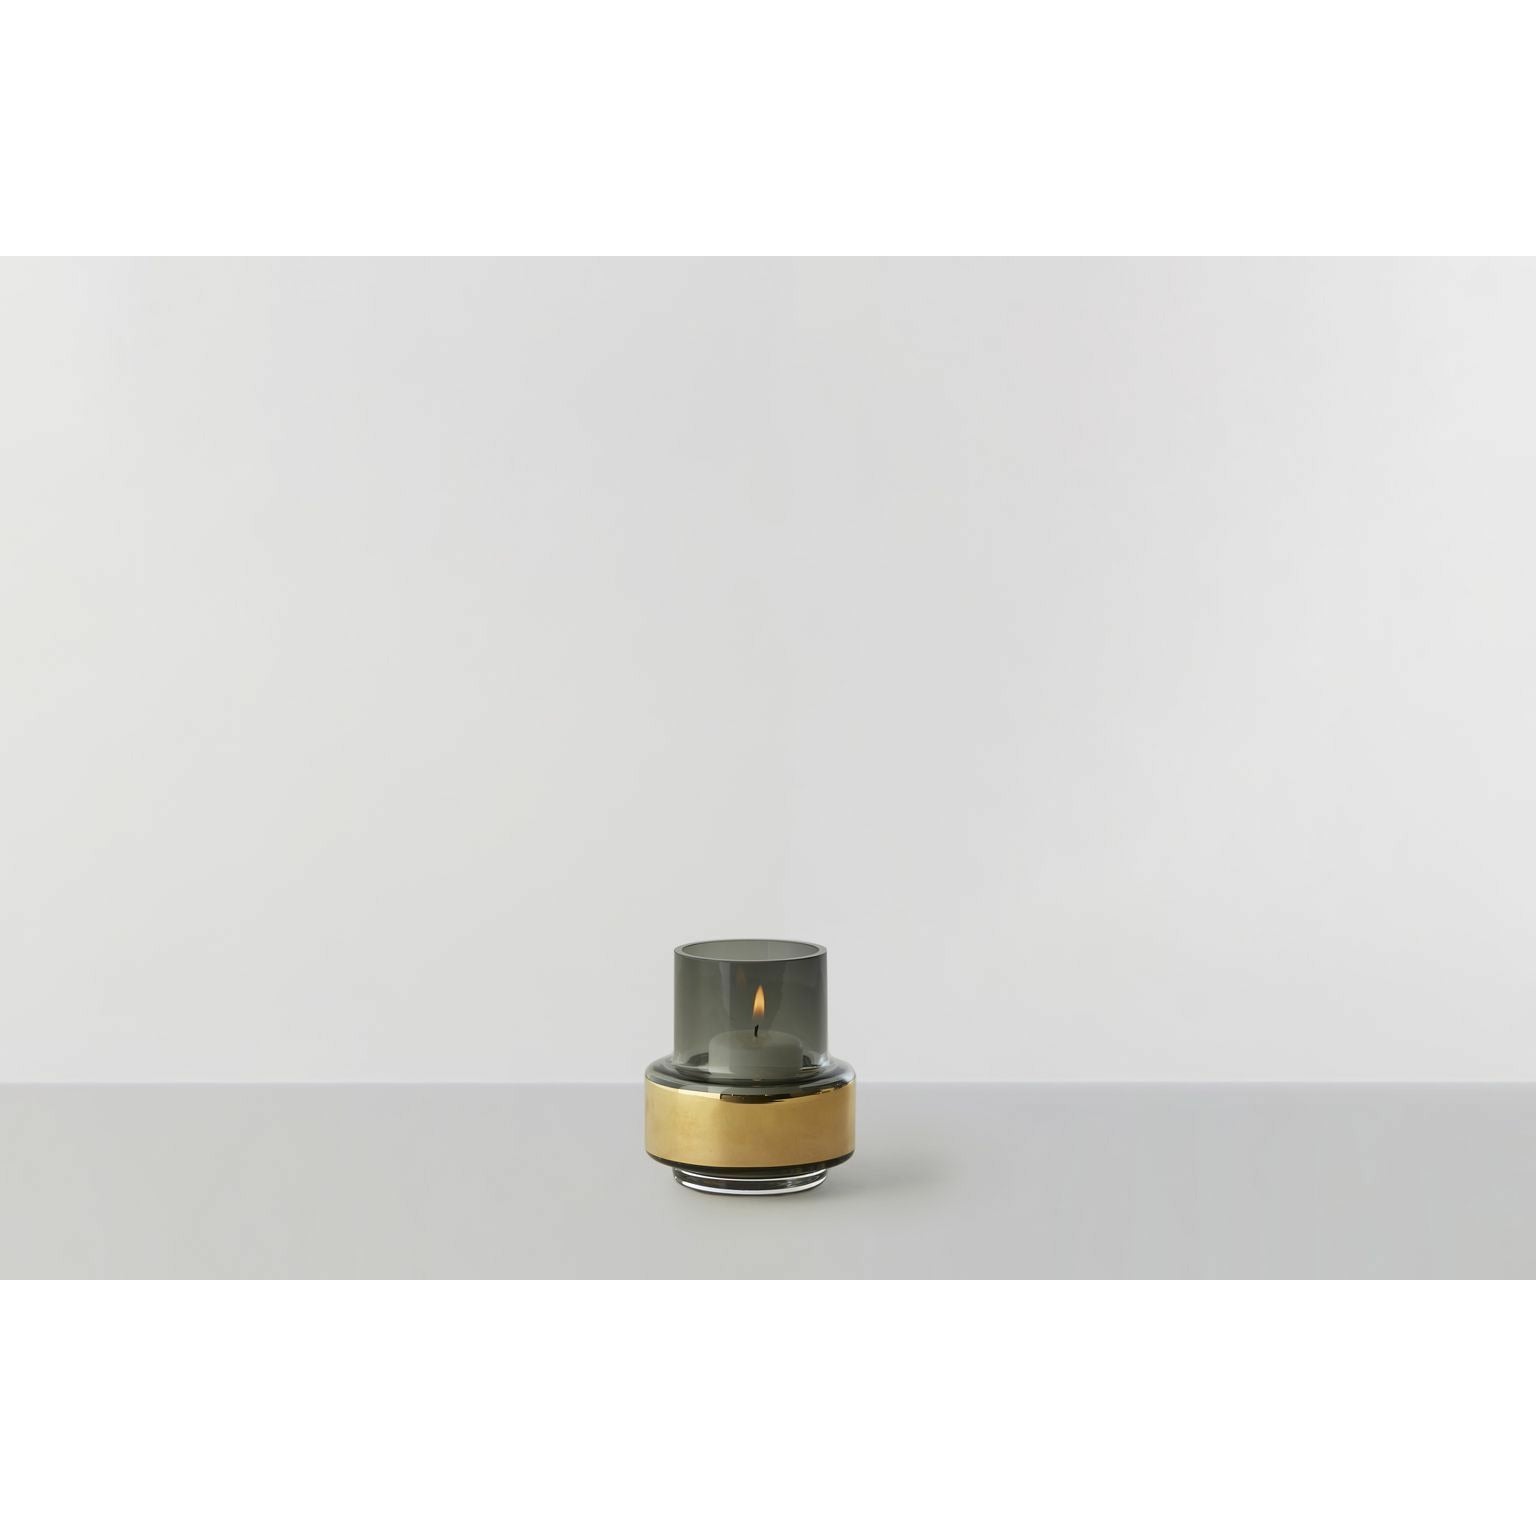 Ro Collection Hurricane No. 25 Tealight Holder, Smoked Grey + Gold